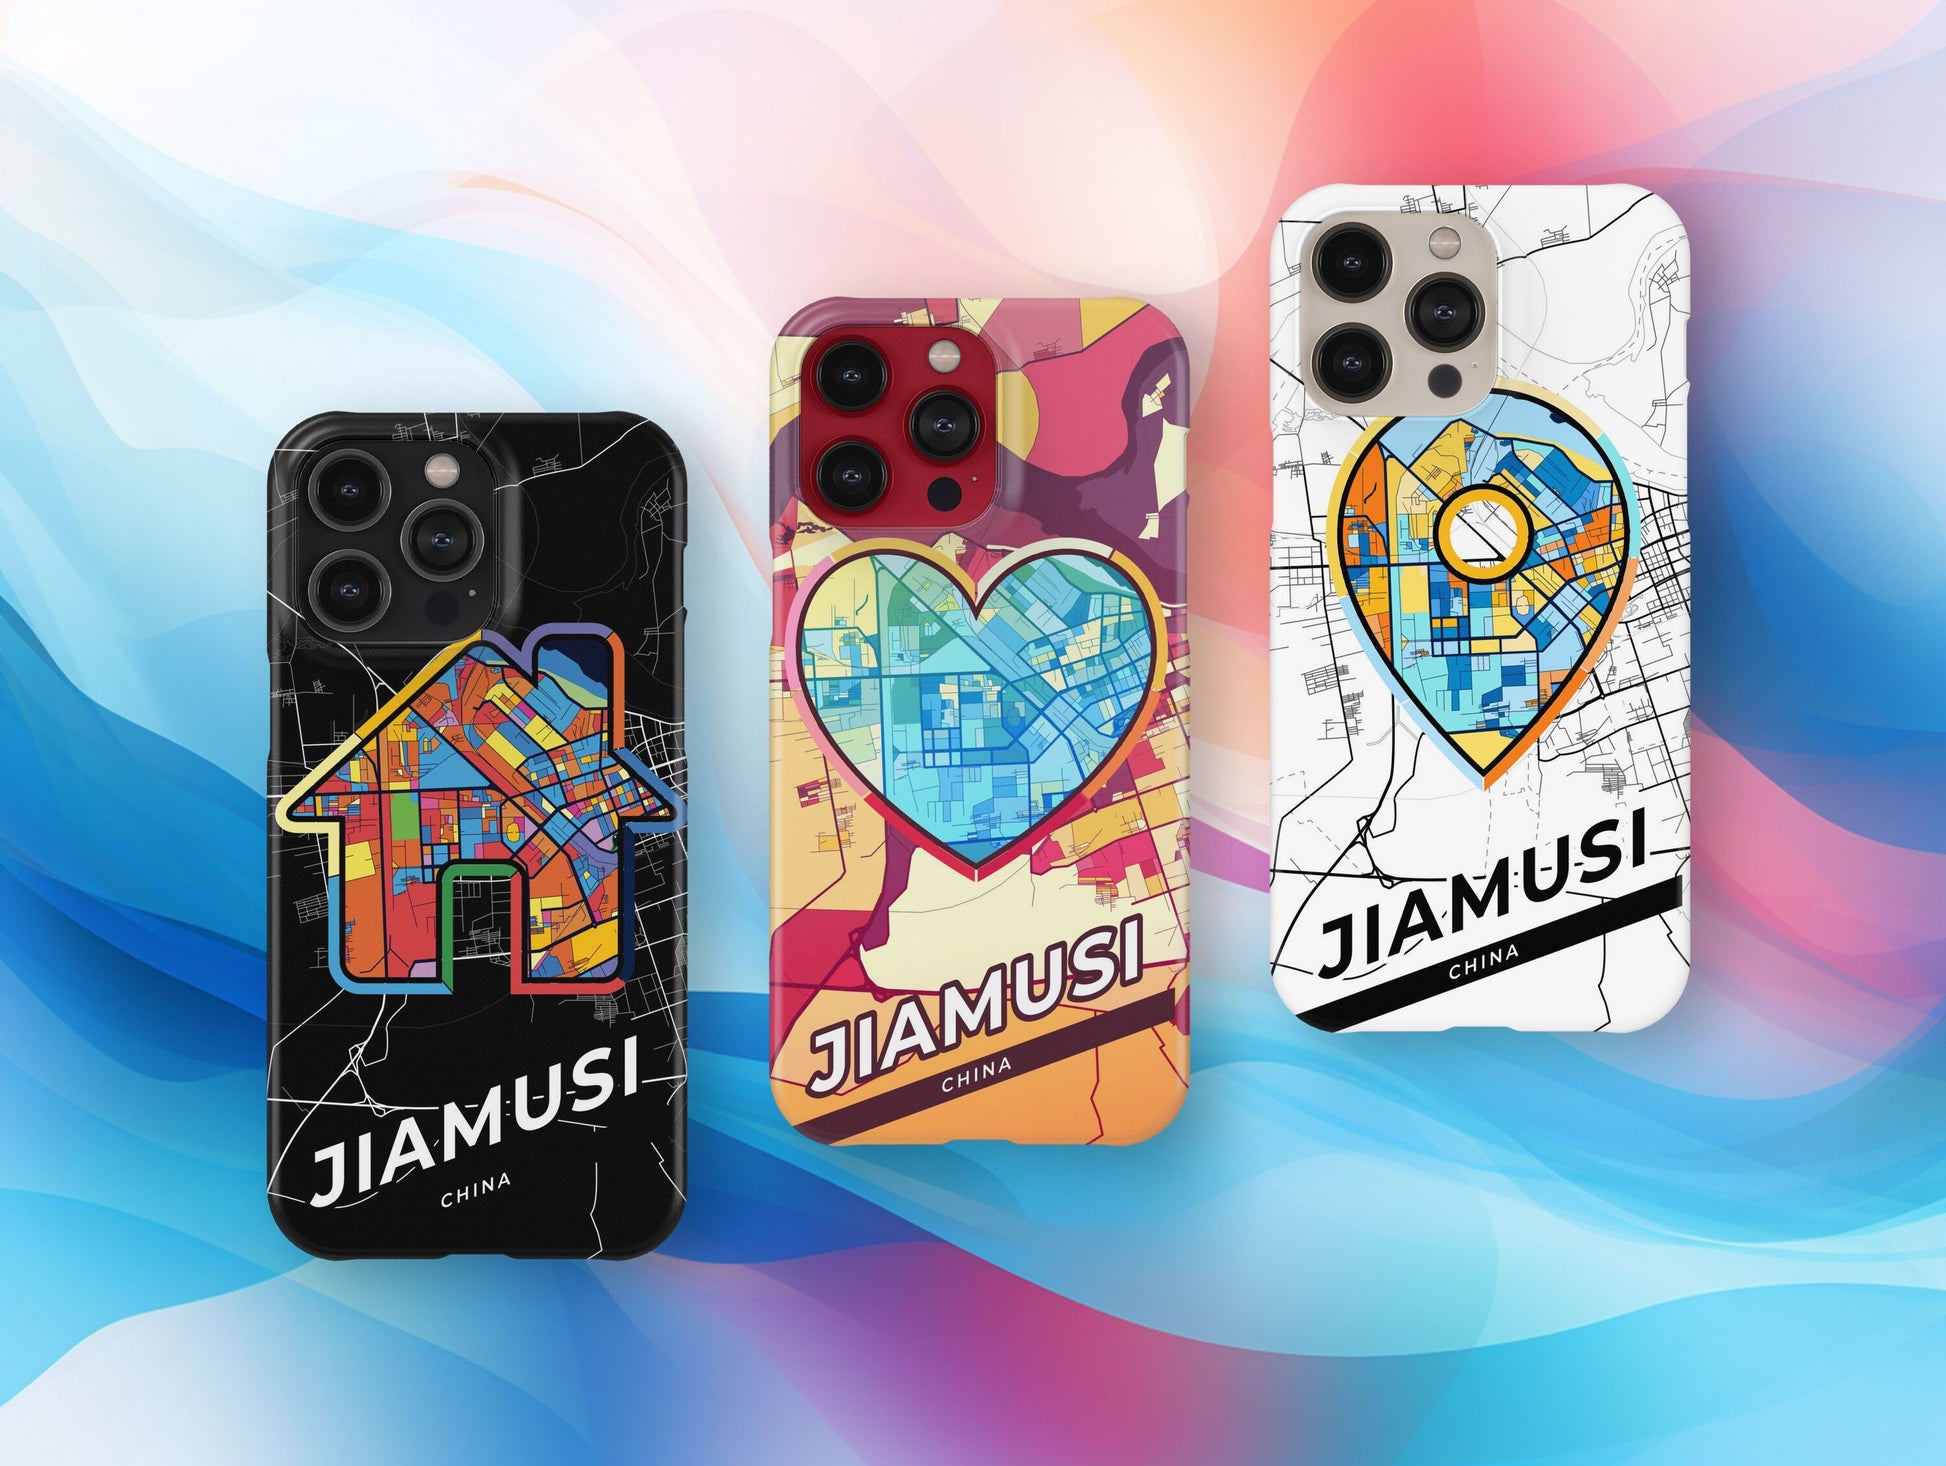 Jiamusi China slim phone case with colorful icon. Birthday, wedding or housewarming gift. Couple match cases.